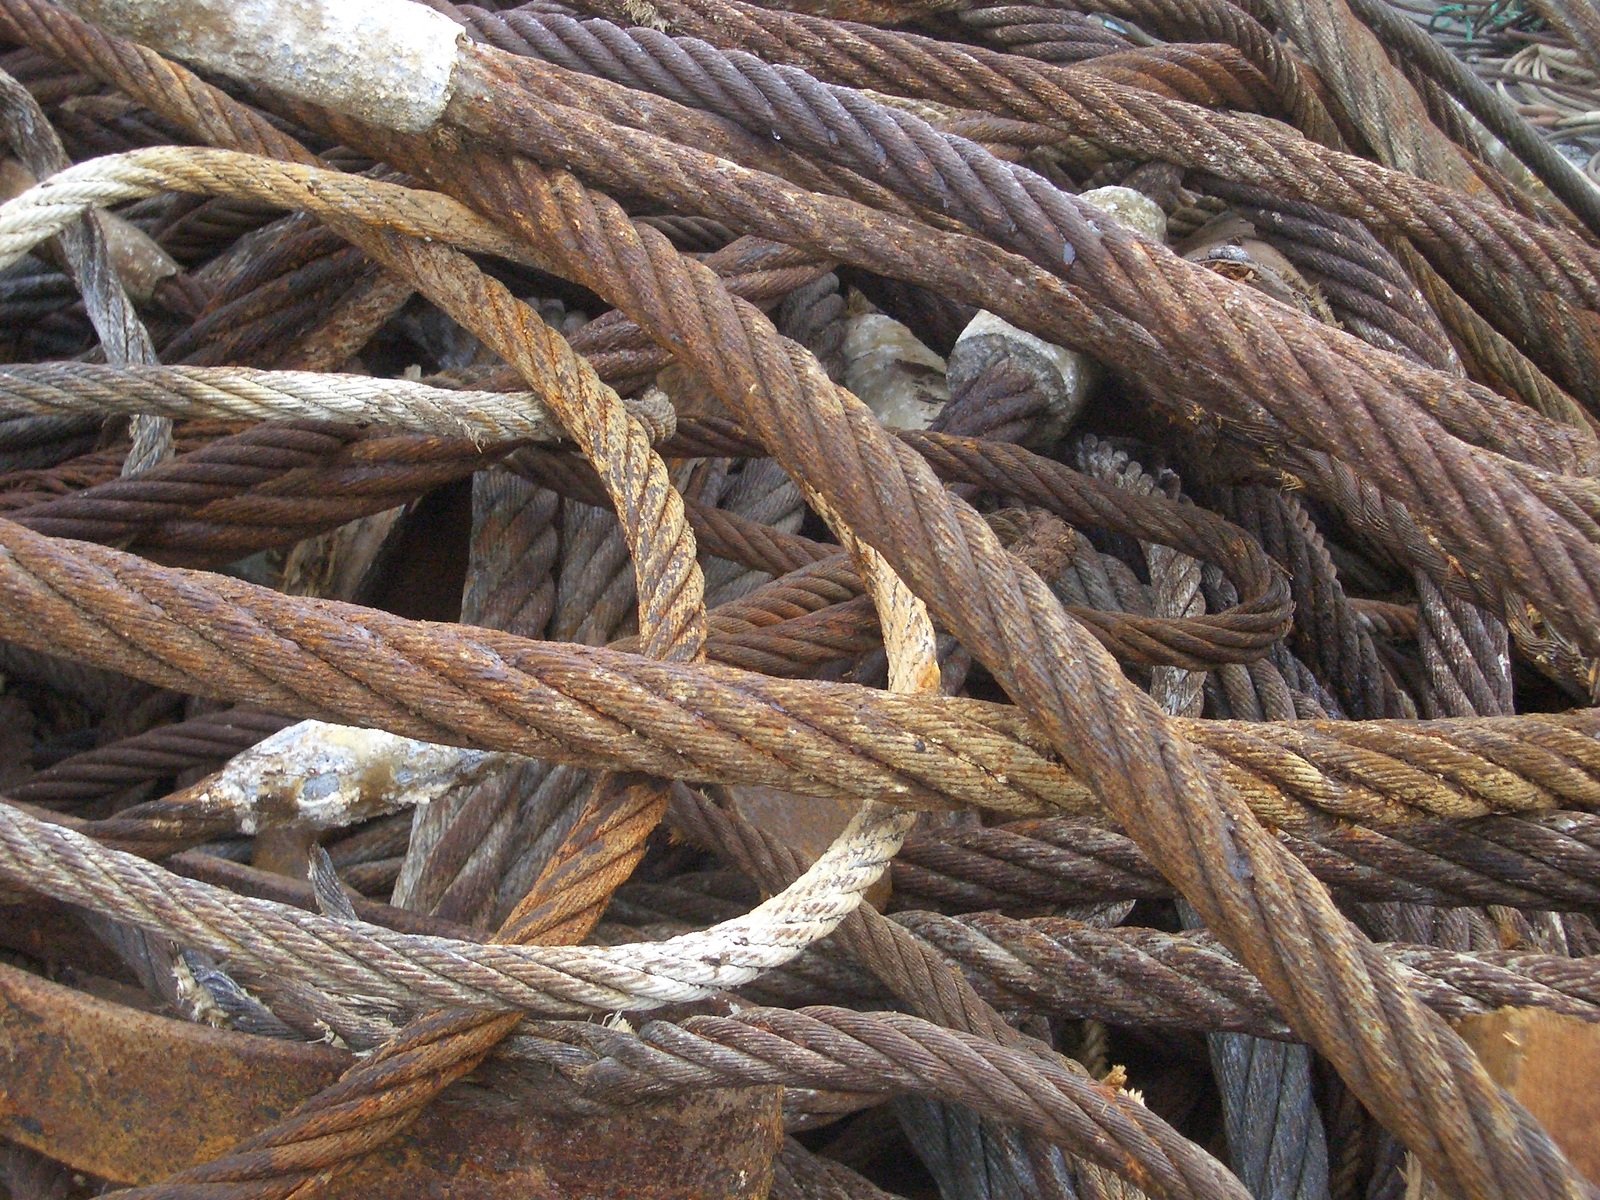 a pile of rope that has been piled together